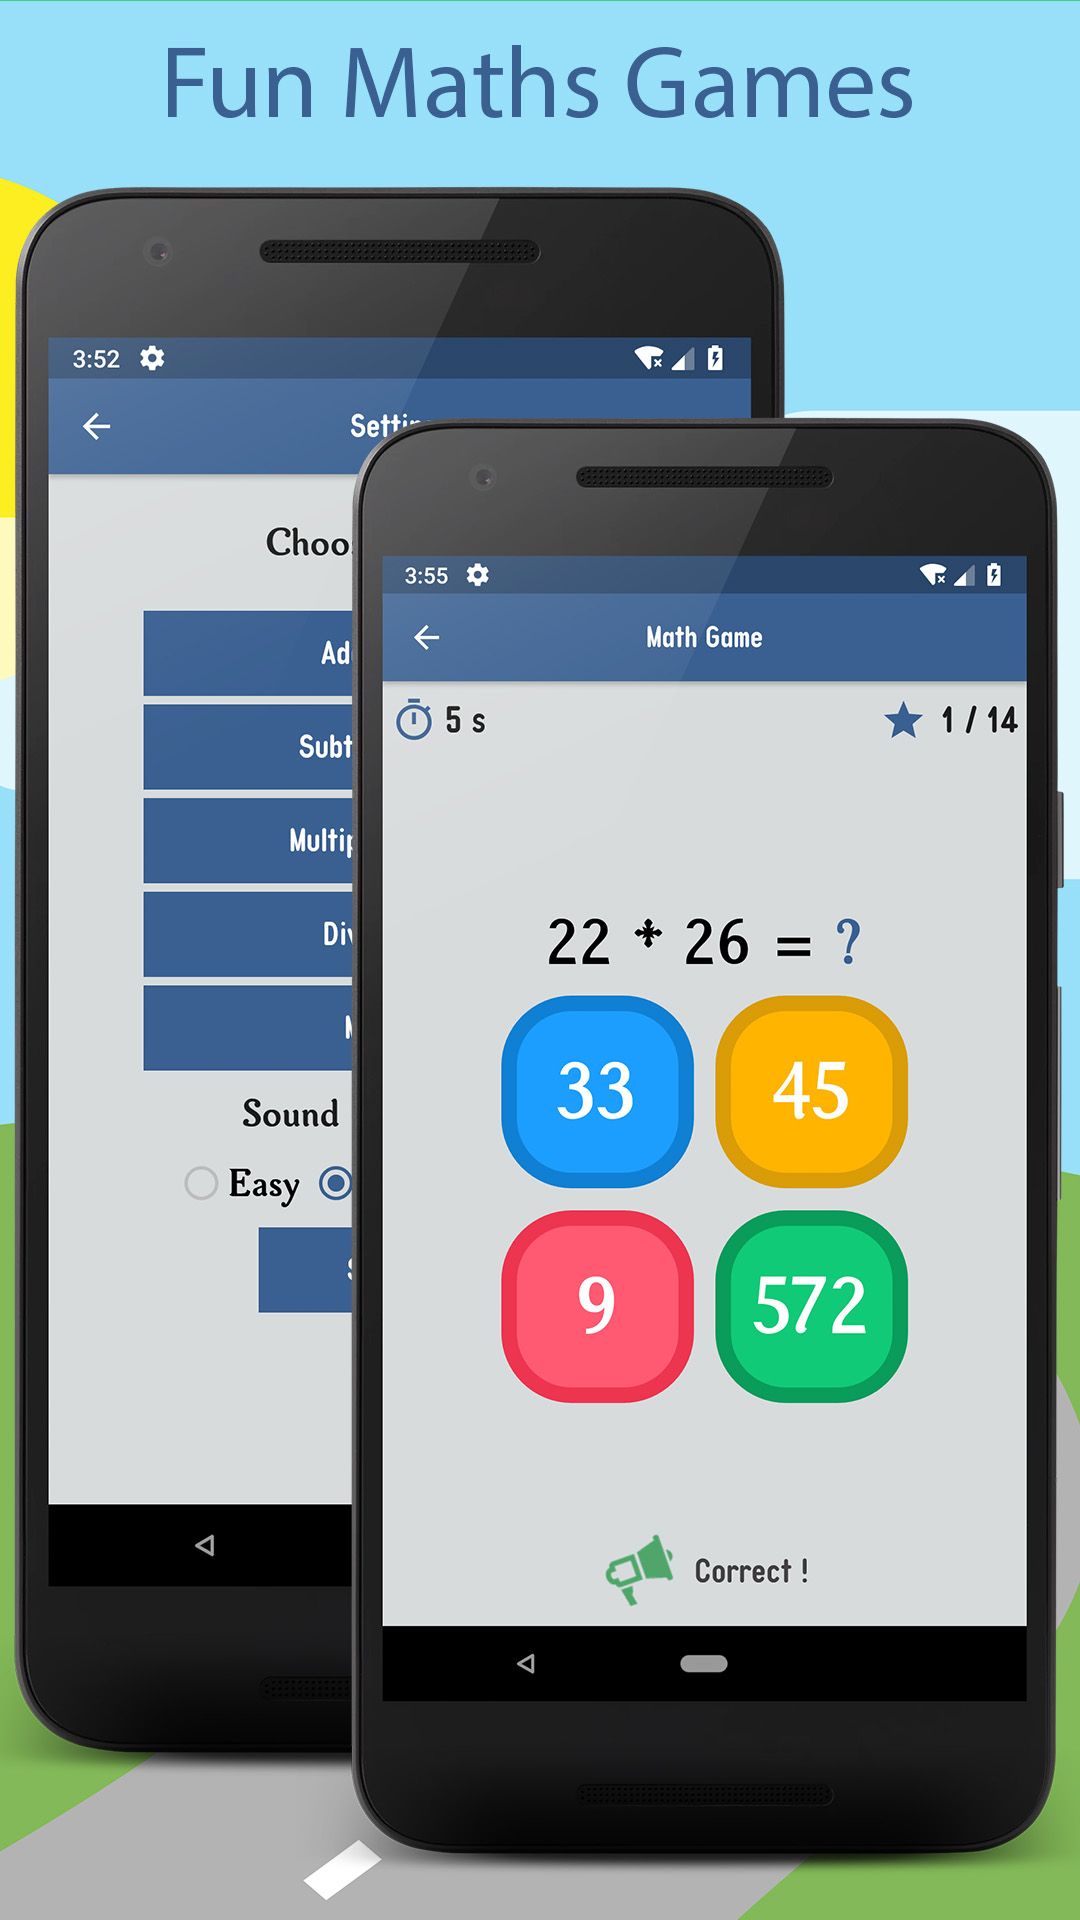 Maths Games - Android App Source Code by Victorytemplate ...